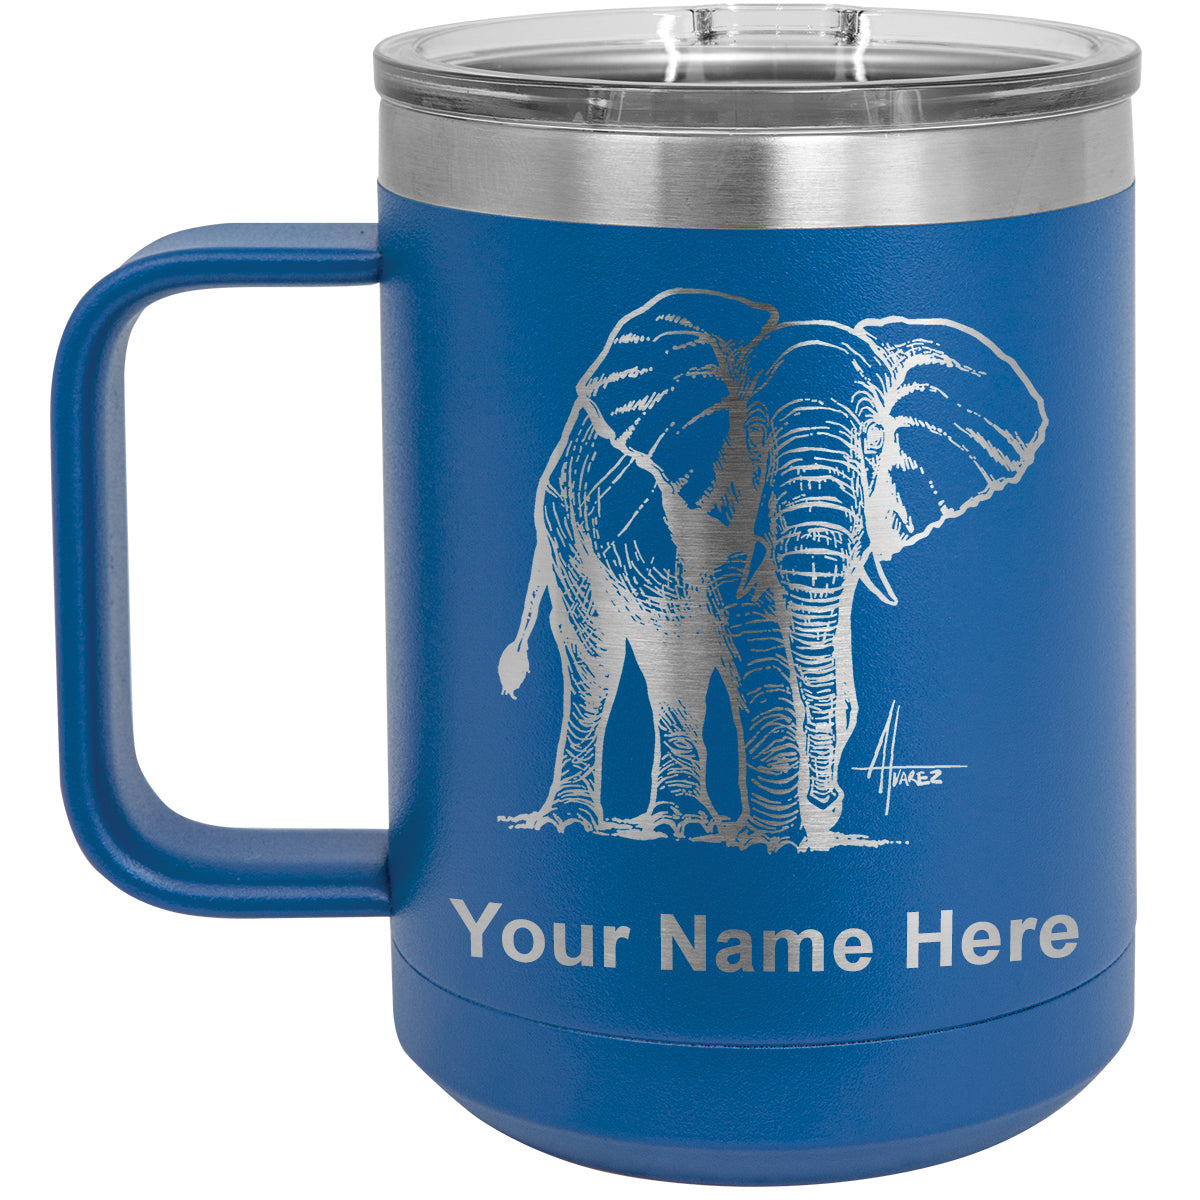 15oz Vacuum Insulated Coffee Mug, African Elephant, Personalized Engraving Included